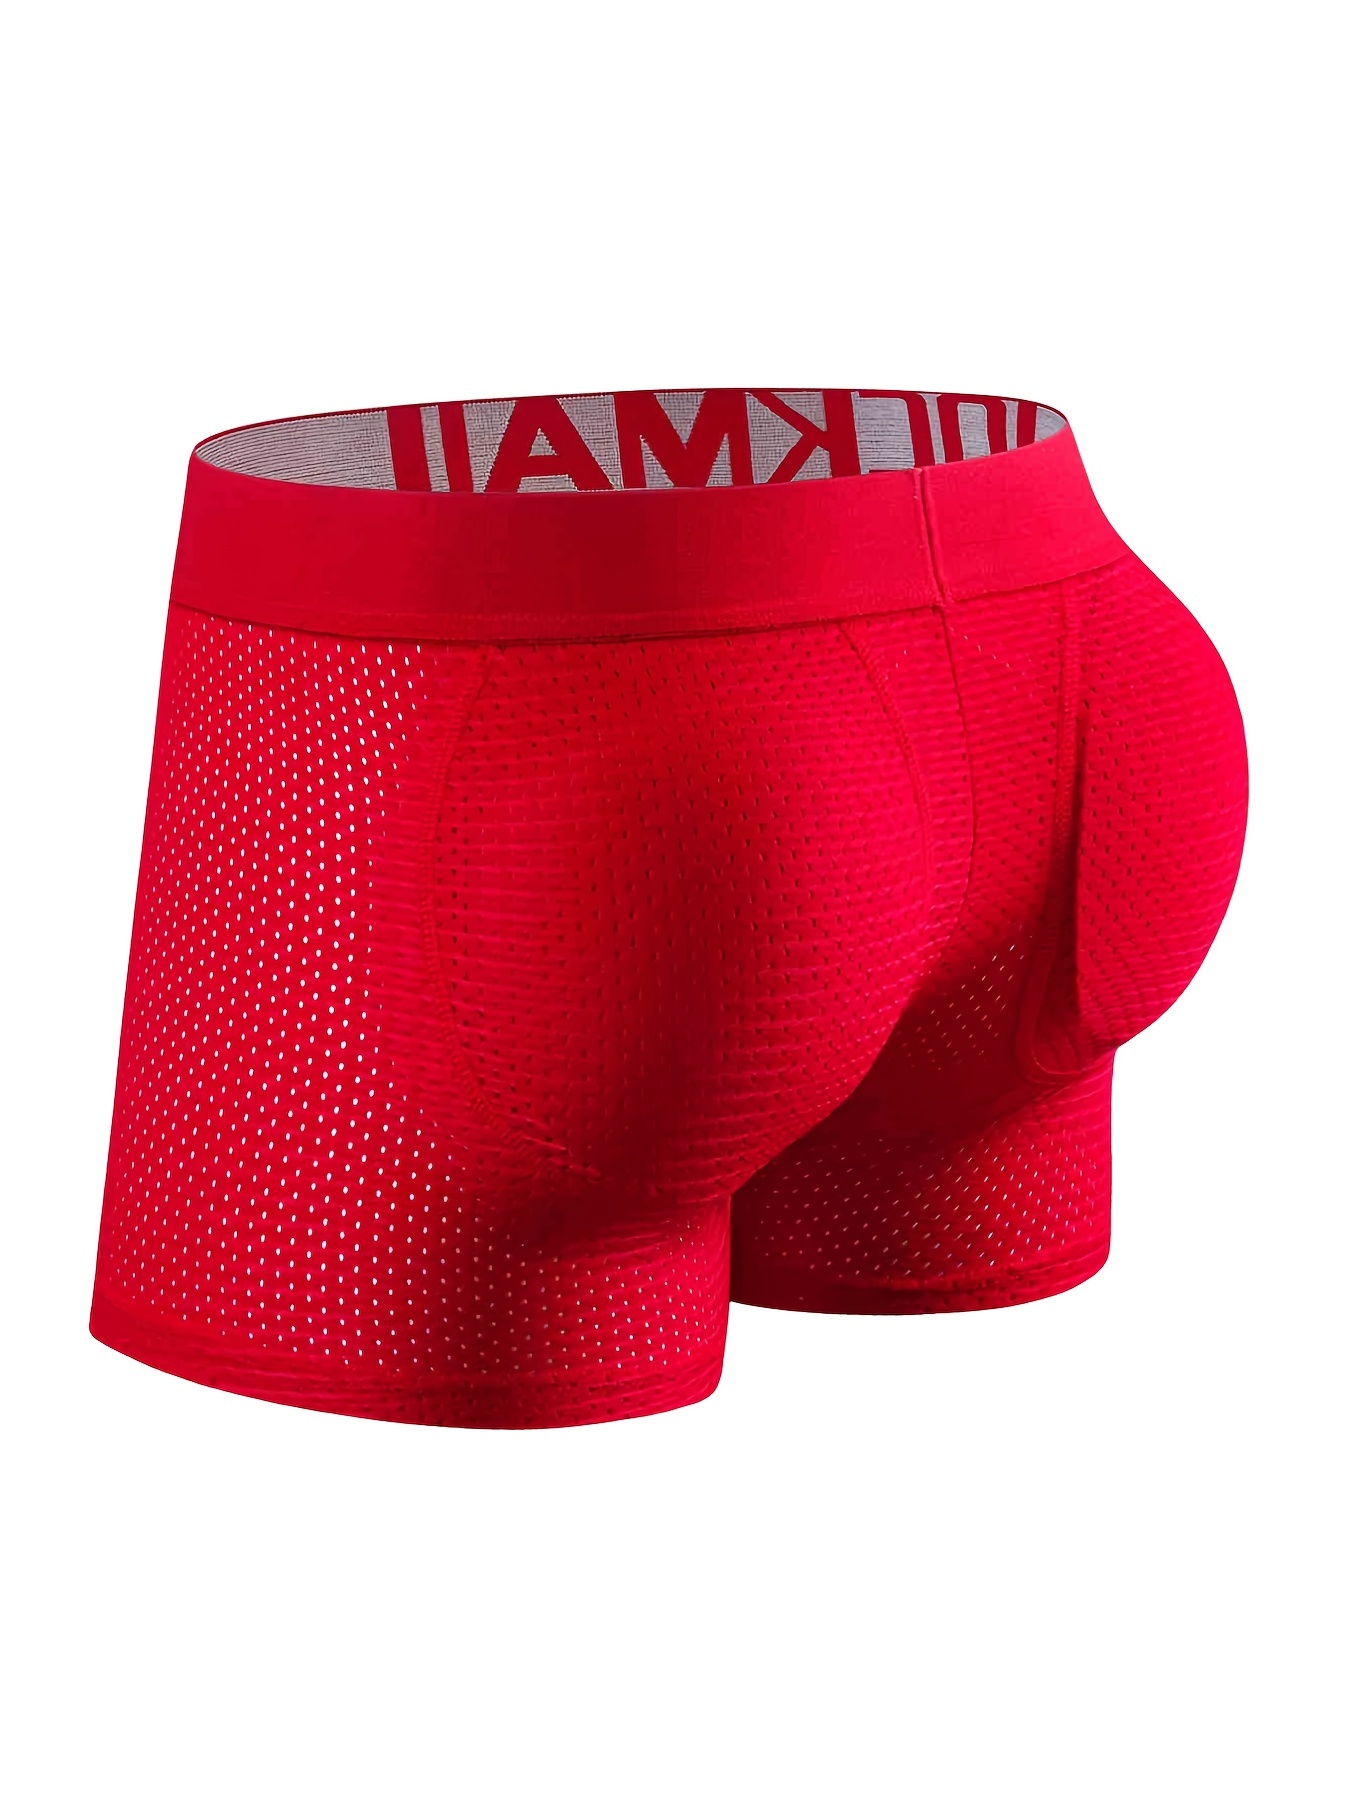 Pikante Underwear - 🌶Make your butt look pretty and renewed with this New  Collection made by Clever. Take a look, and Buy Them All!!! 🌶🔥  🌶 #hotmodel  #lingerieformen #mensunderwear